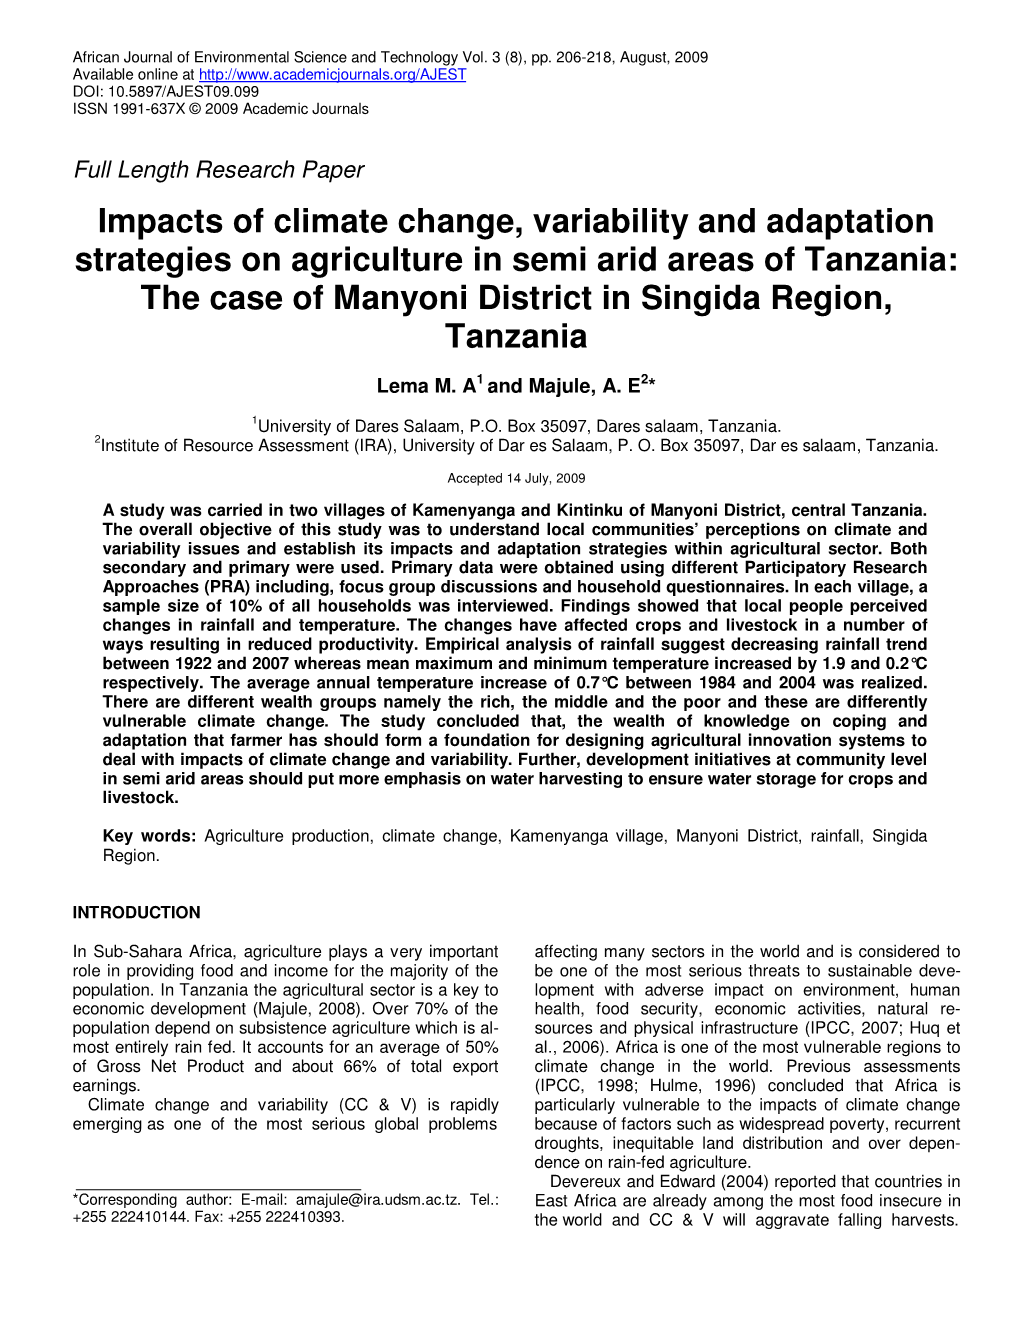 Impacts of Climate Change, Variability and Adaptation Strategies On